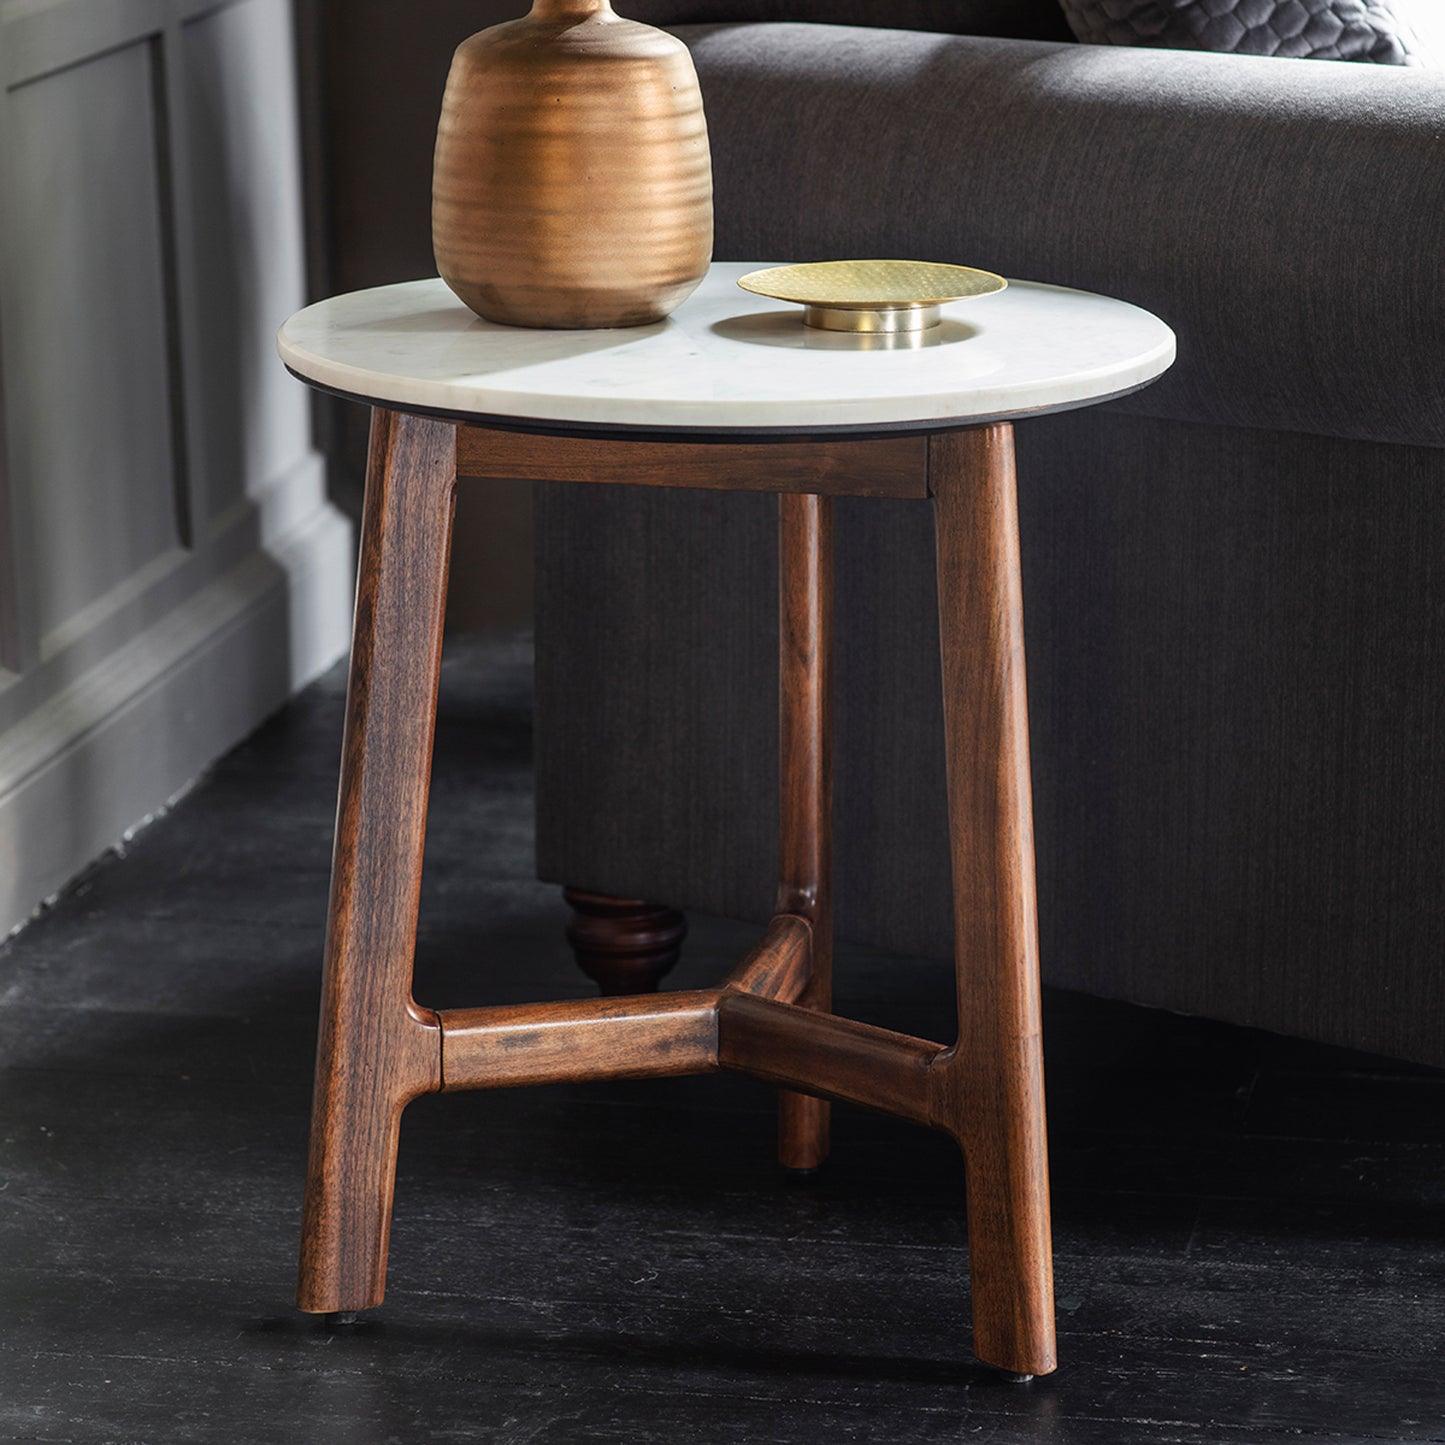 Load image into Gallery viewer, An Avonwick Side Table 500x500x550mm from Kikiathome.co.uk adorned with a vase, perfect for home furniture and interior decor.
